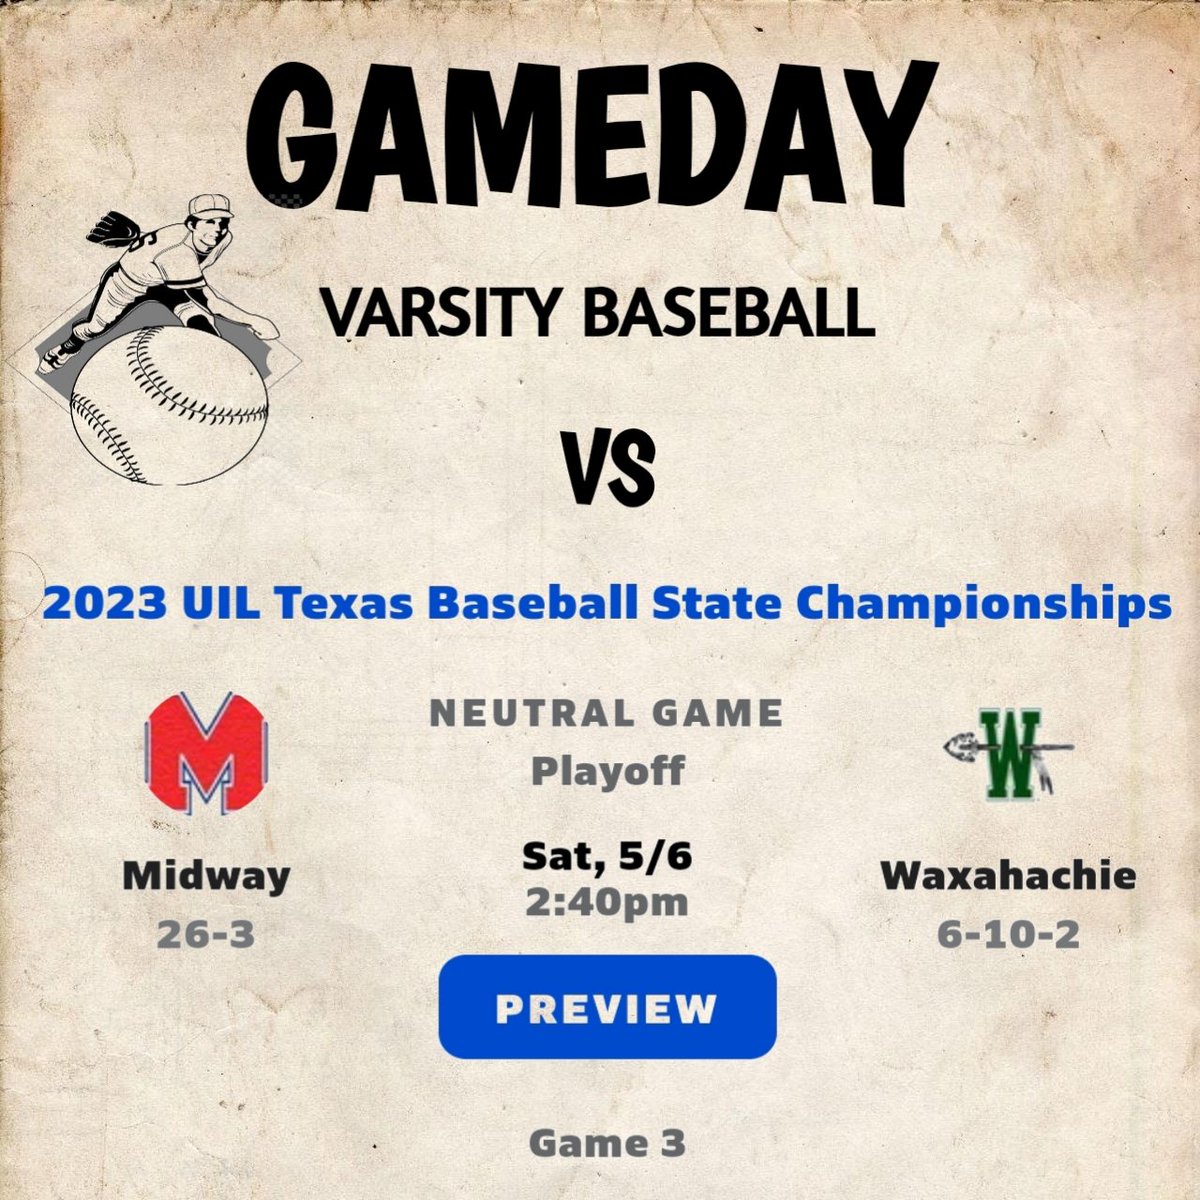 Gameday HS Baseball 
@MidwayPanthers @MidwayBsball @CoachPresident
 @CameronJ3133 @andrewfossum2 @LawsonLeevi @D1mike9 @hachiesports @WaxahachieISD @HachieBall1909 @RBI_Club @WaxahachieHS @CoachMiller2714 @HachieSportsMed 
Watch Live  ⬇️
📺  bit.ly/3JS3twx